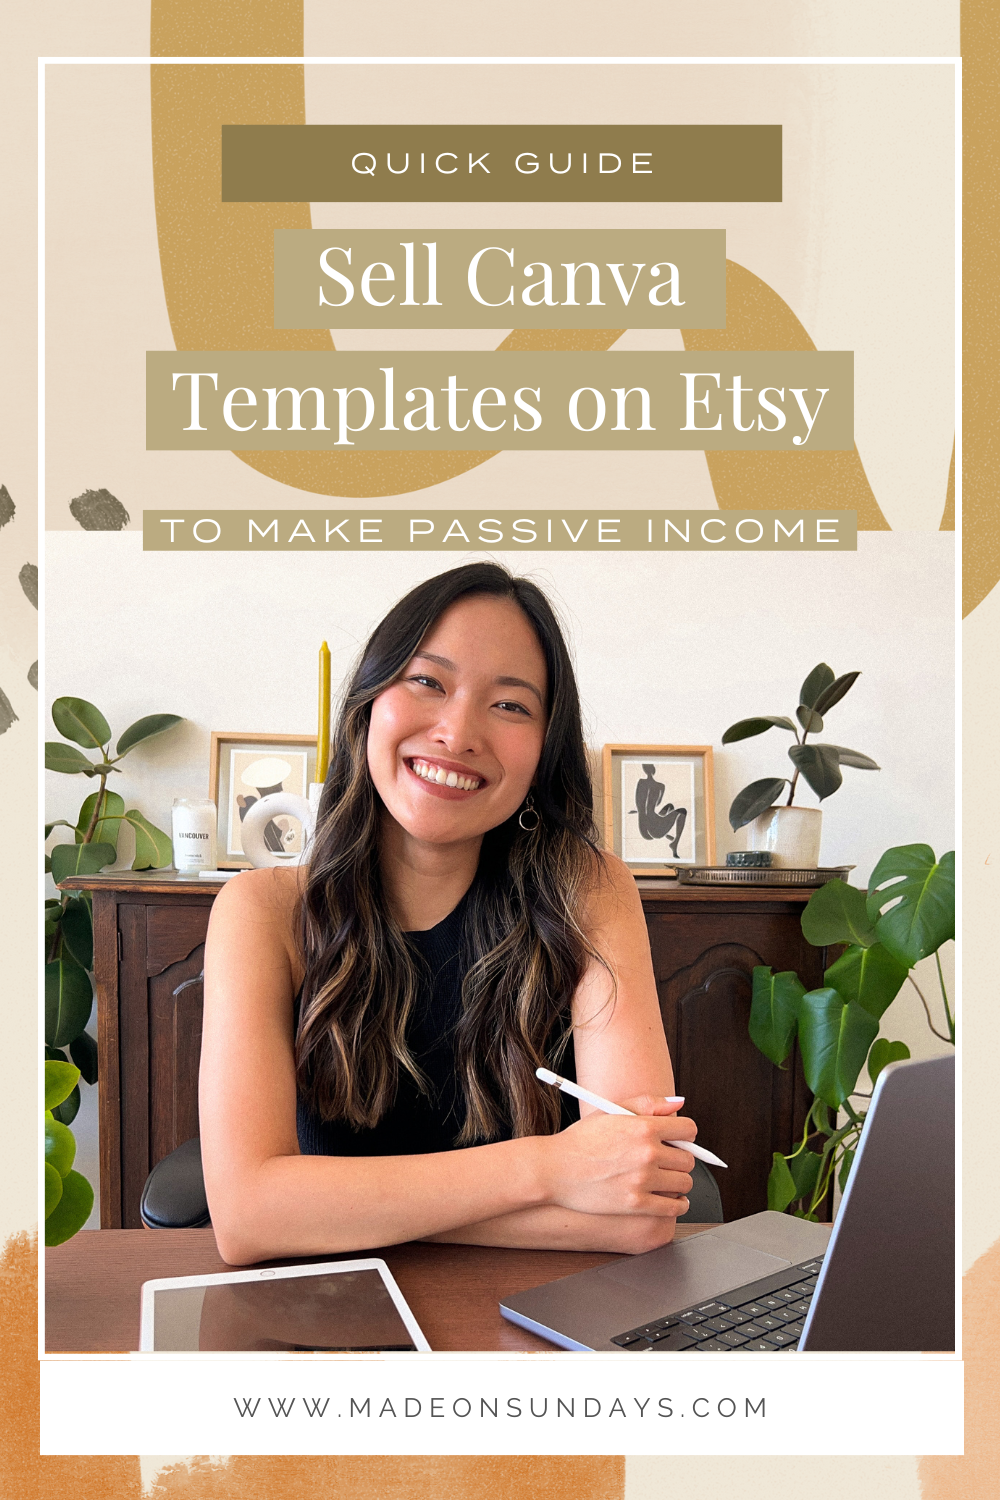 sell-canva-templates-on-etsy-to-make-passive-income-madeonsundays